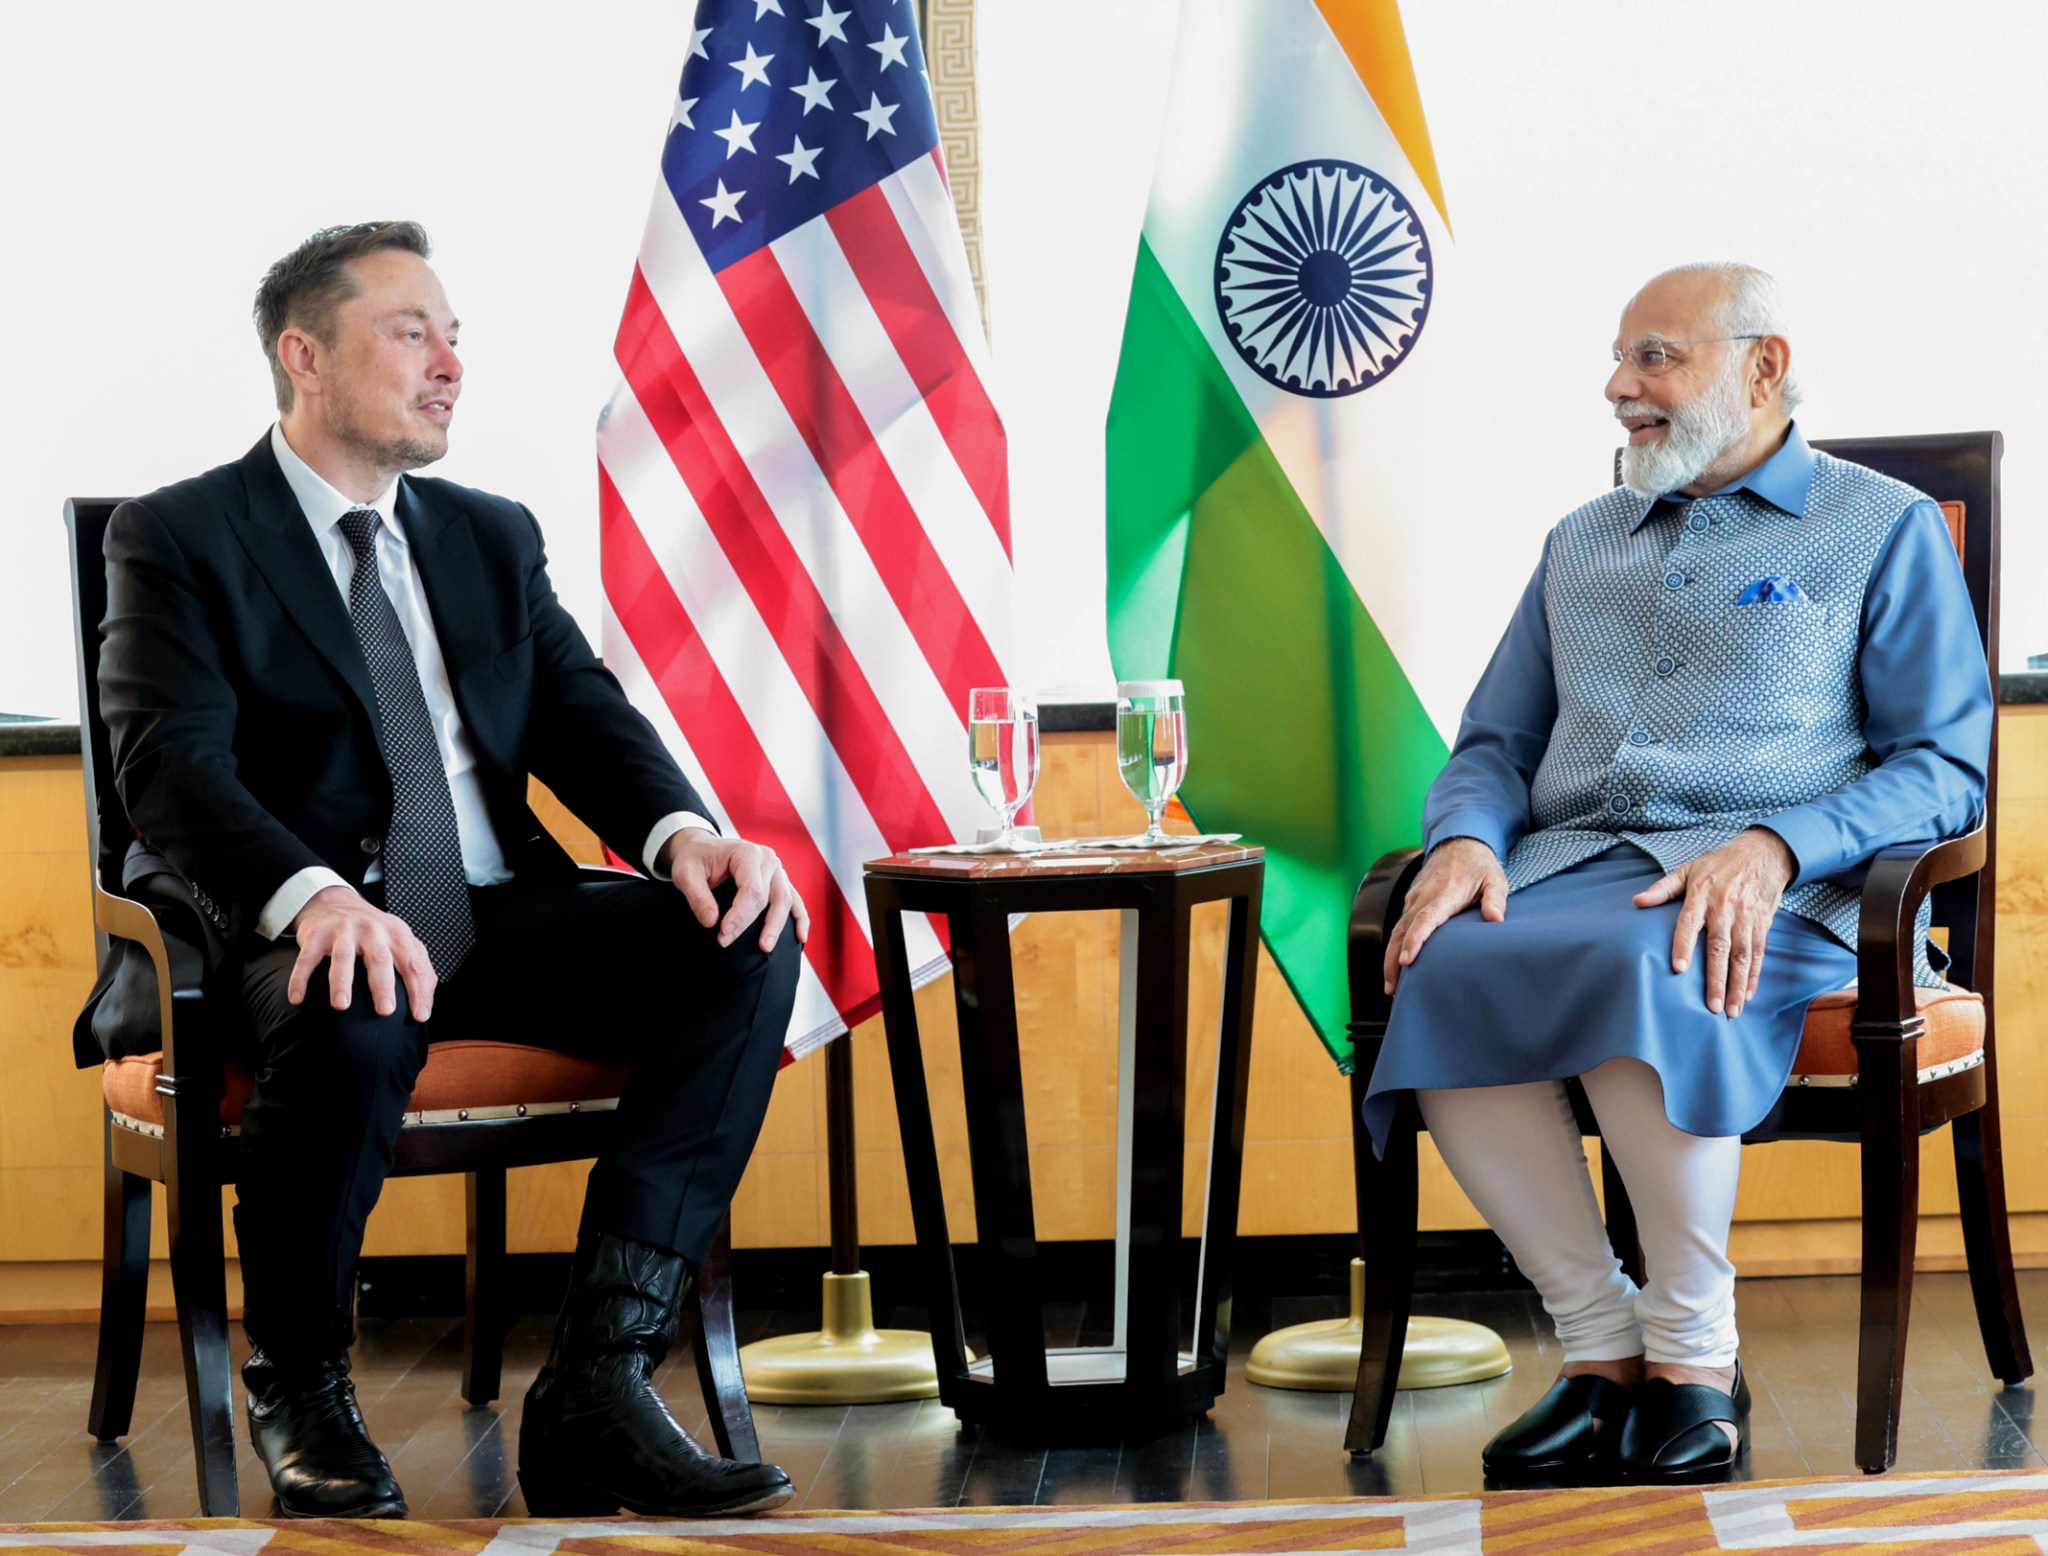 Elon Musk wanted India to cut EV import tariffs before he opens a factory. It looks like it’s not happening